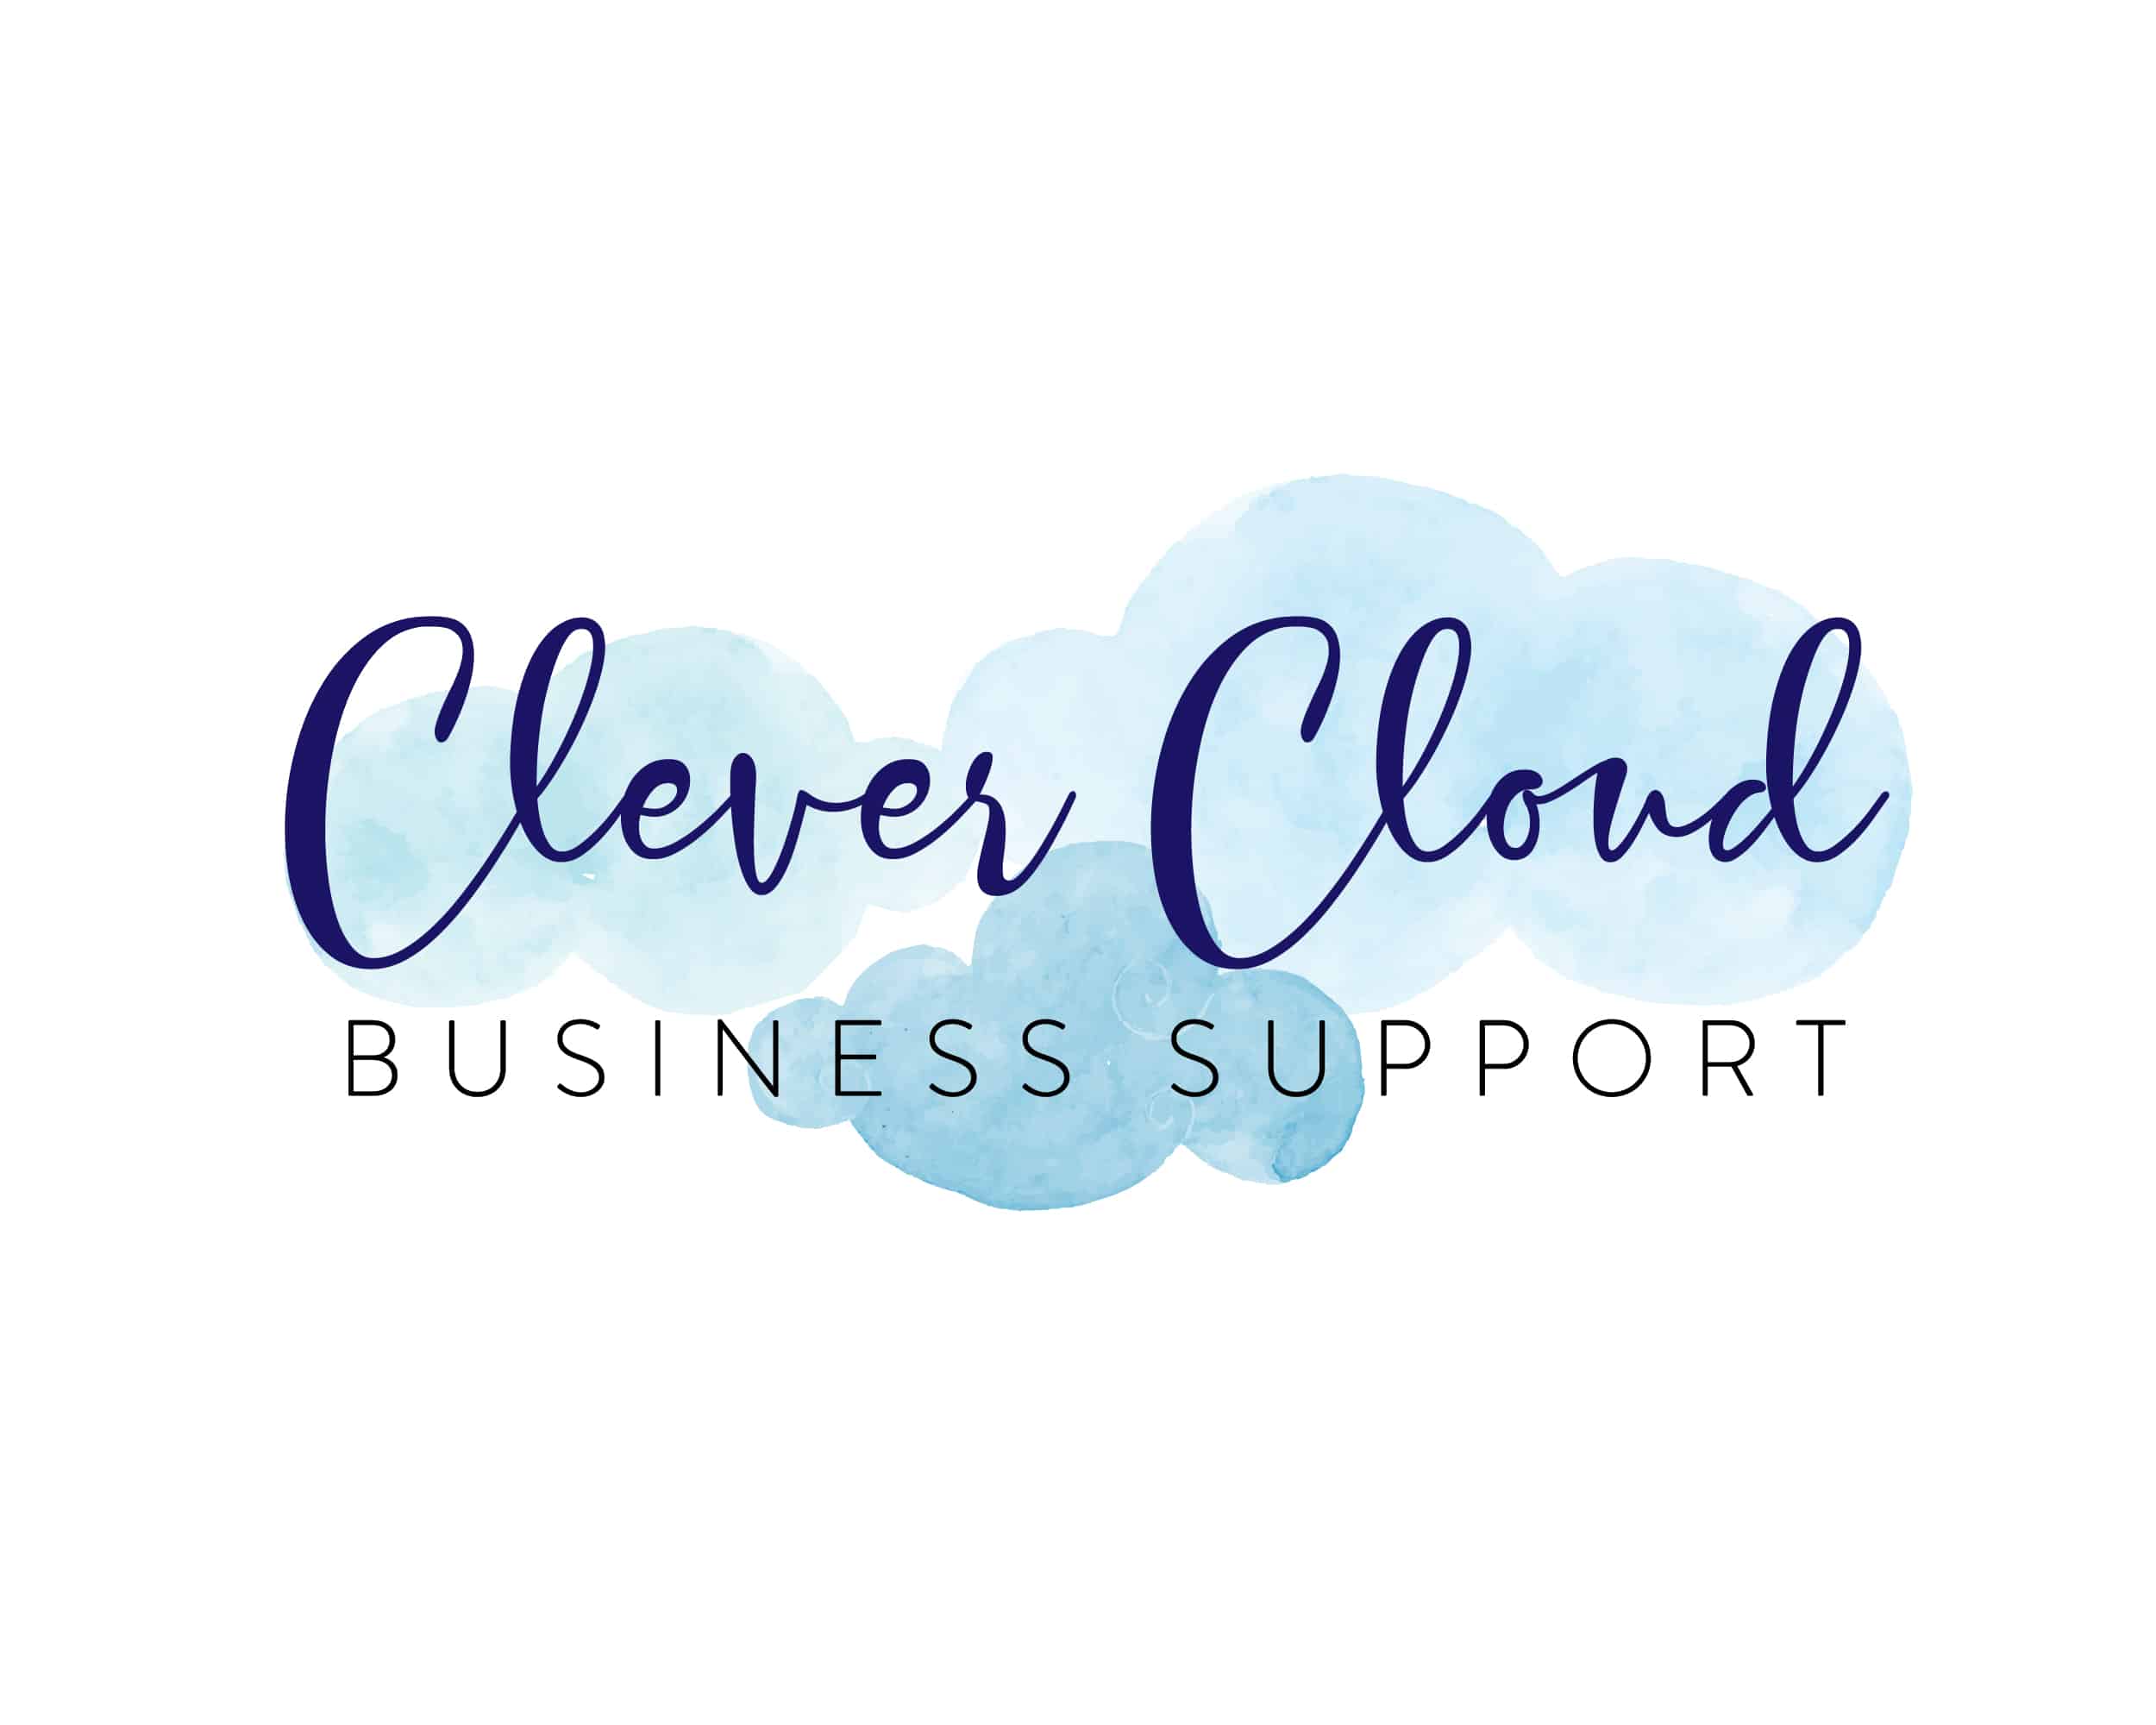 Clever-Cloud-business-support